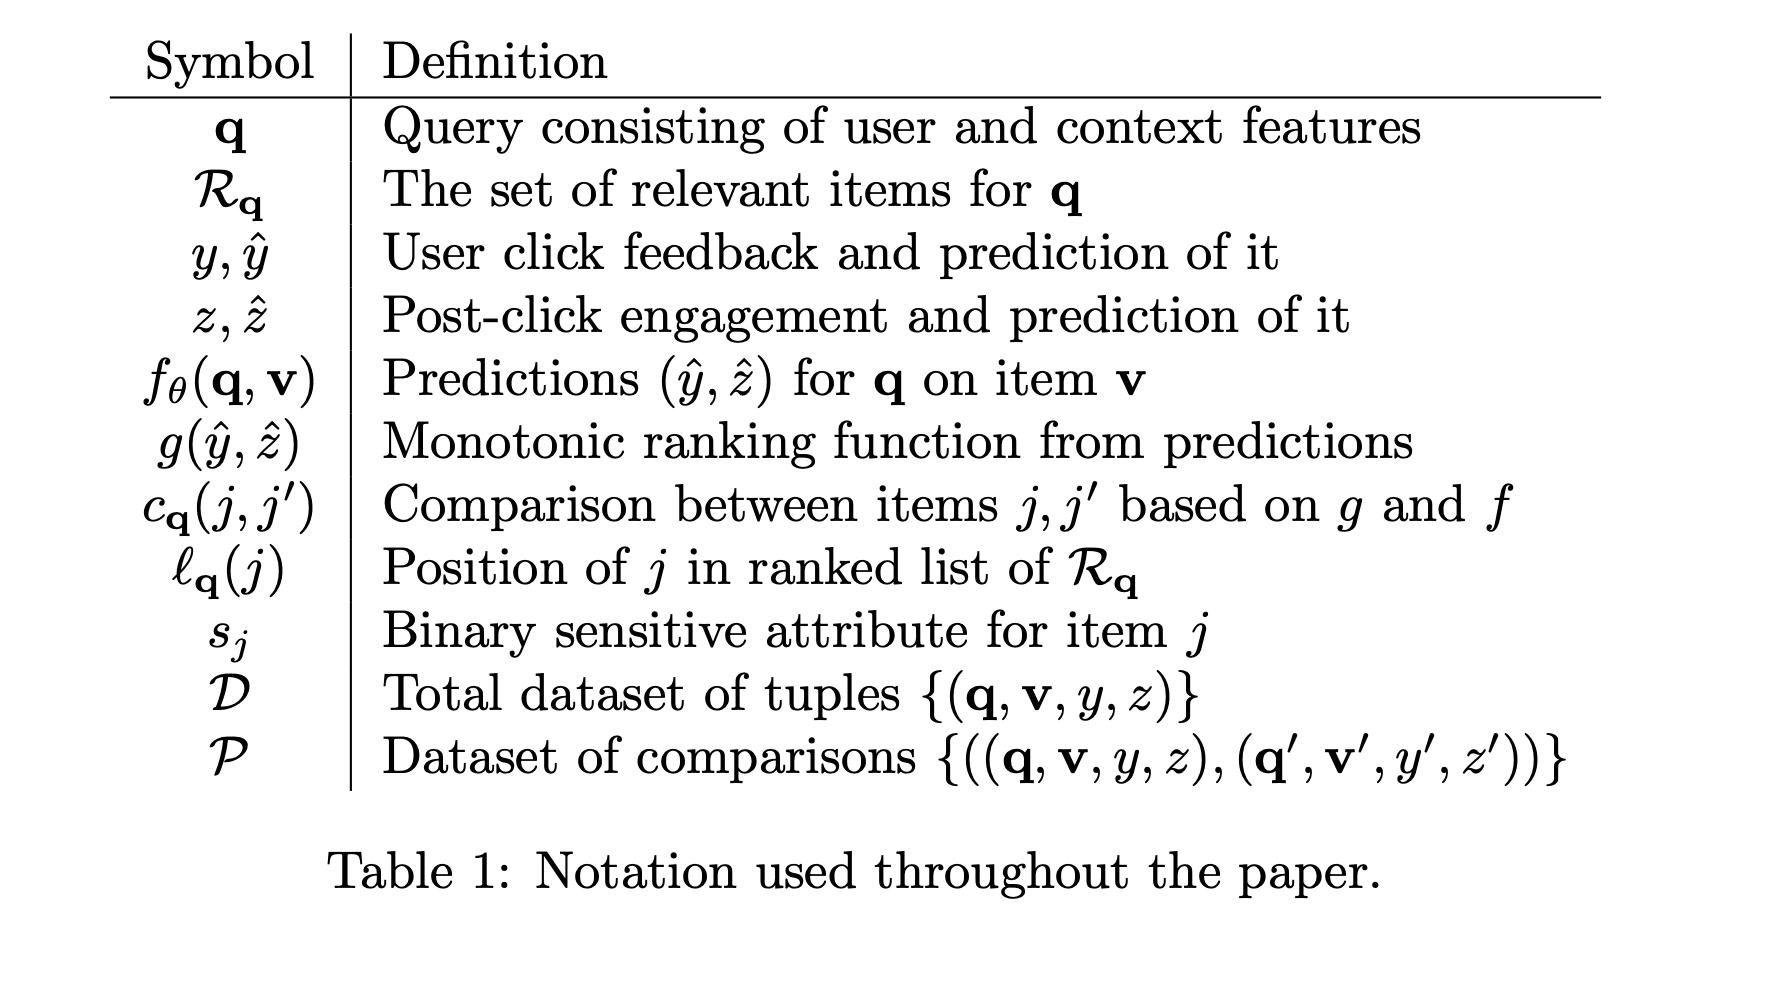 Notation used throughout the paper